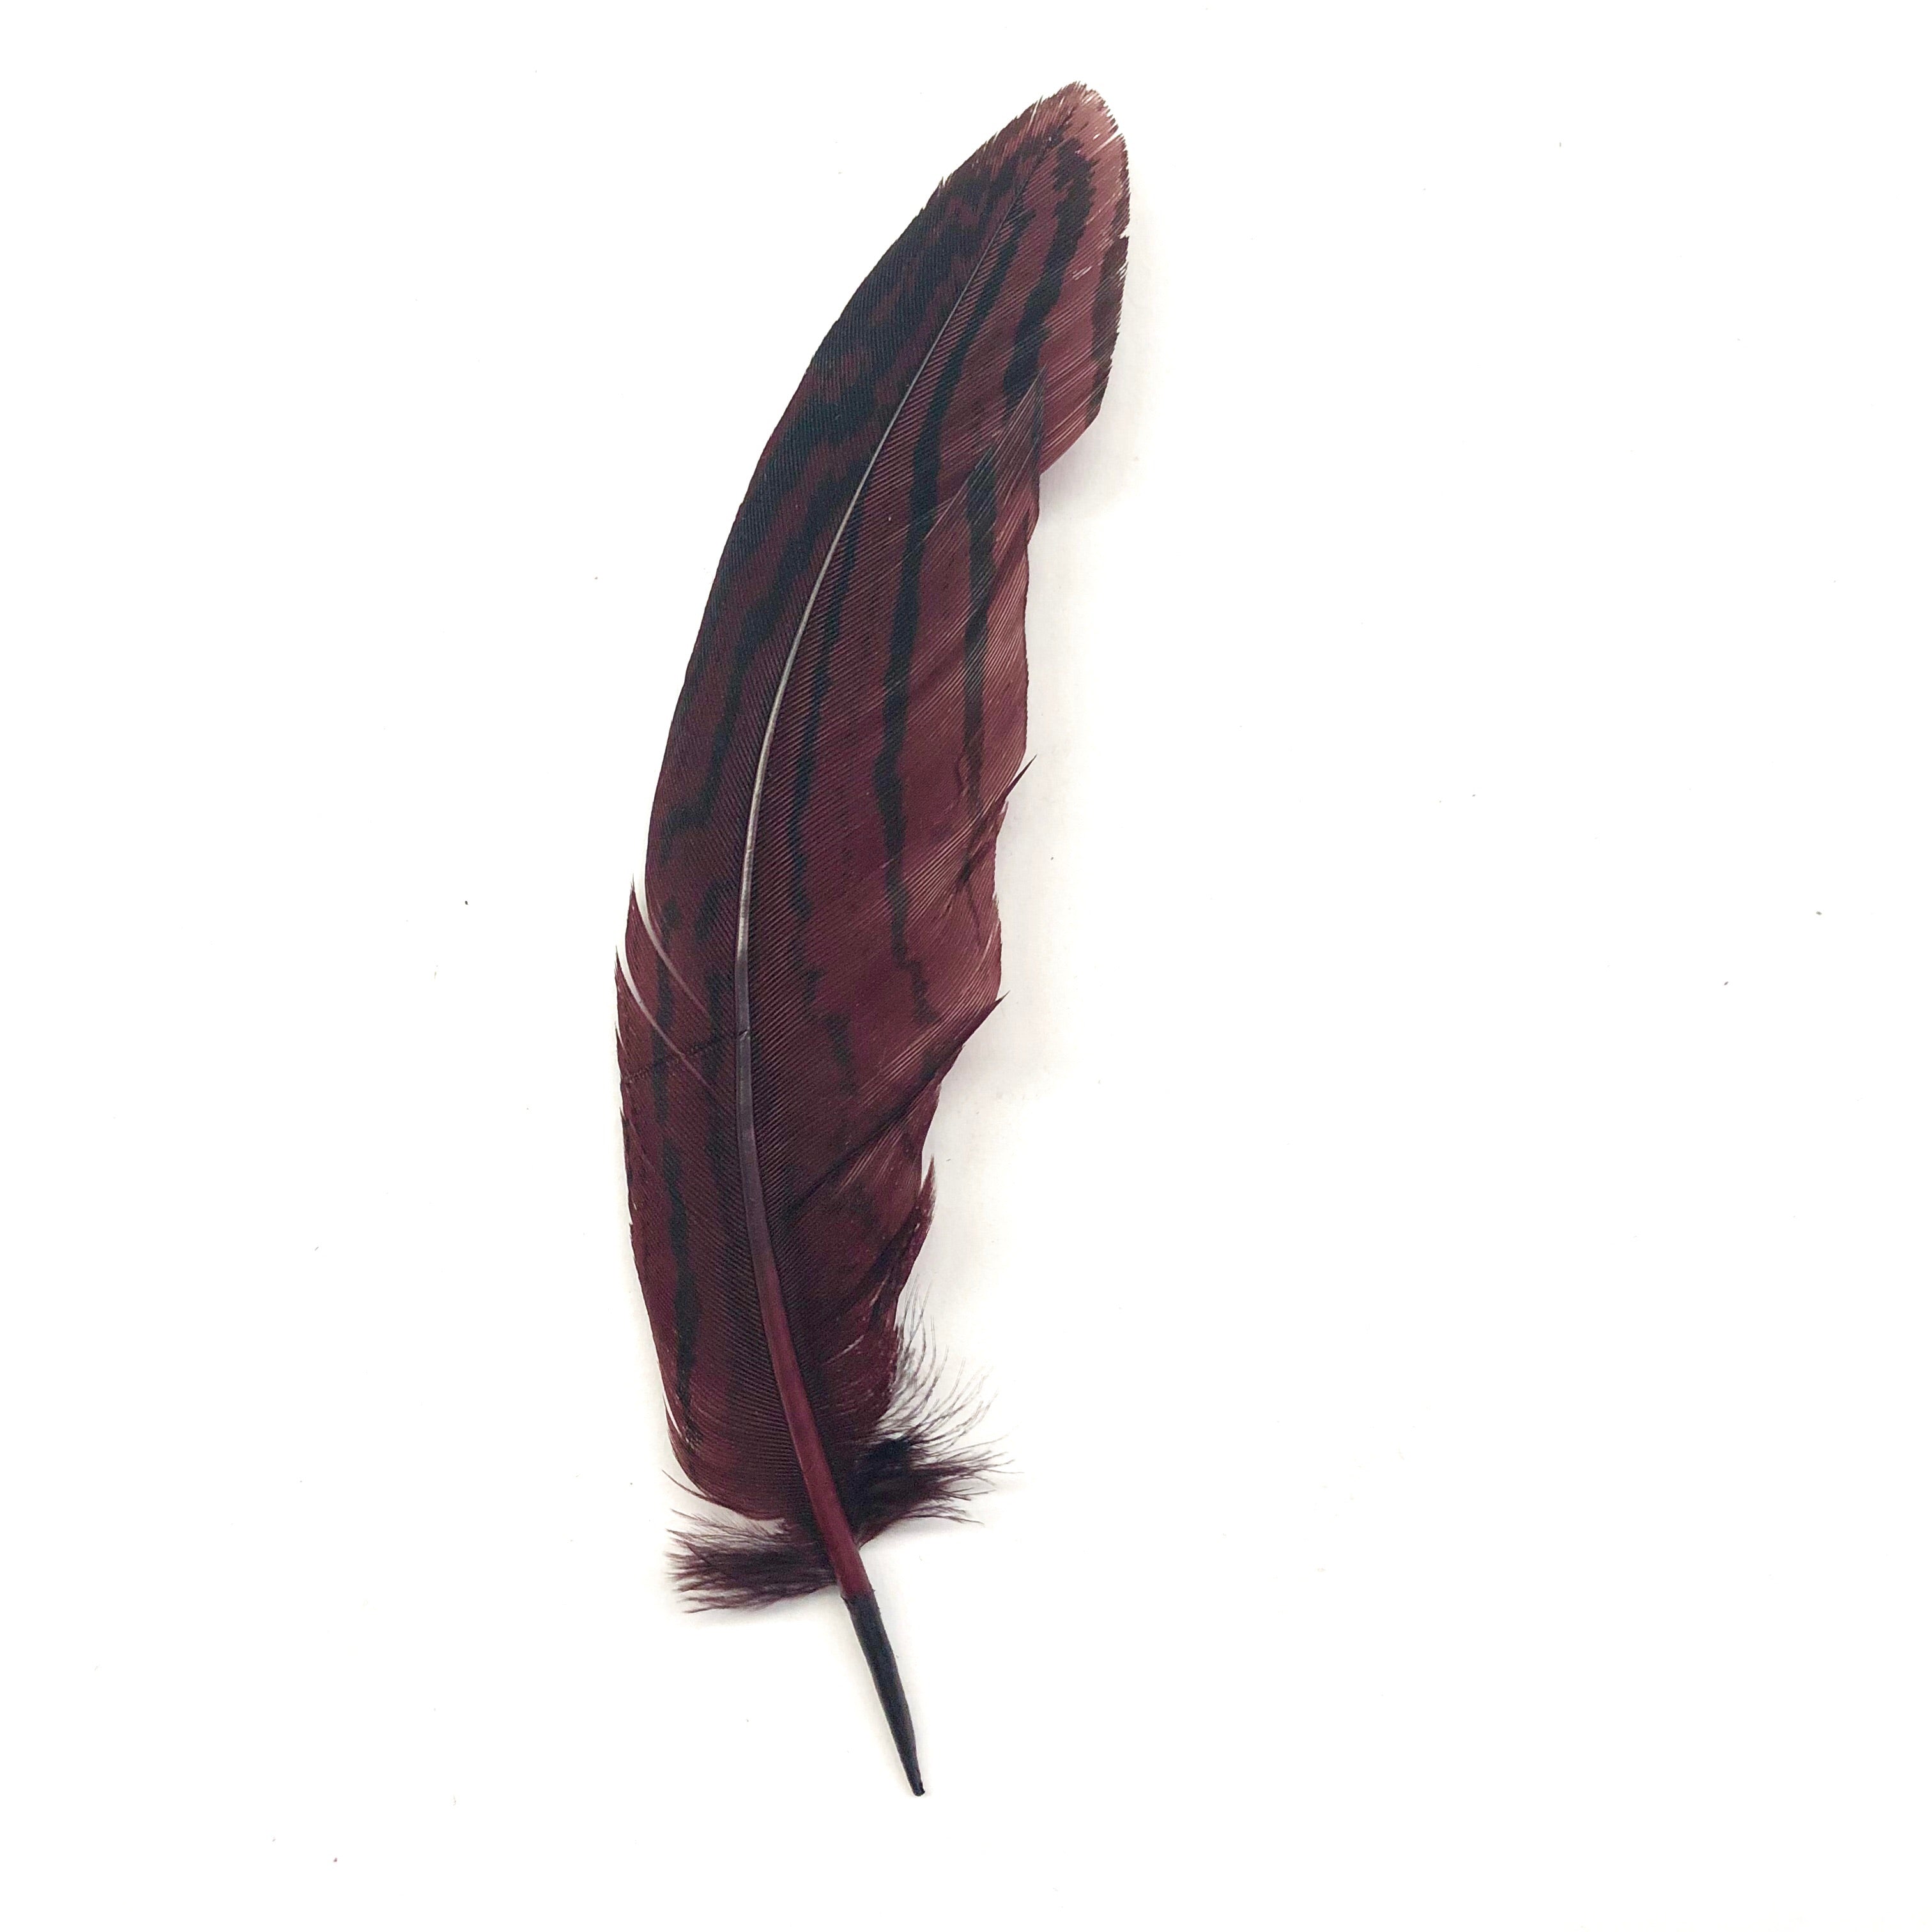 Under 6" Silver Pheasant Tail Feather x 10 pcs - Chocolate Brown